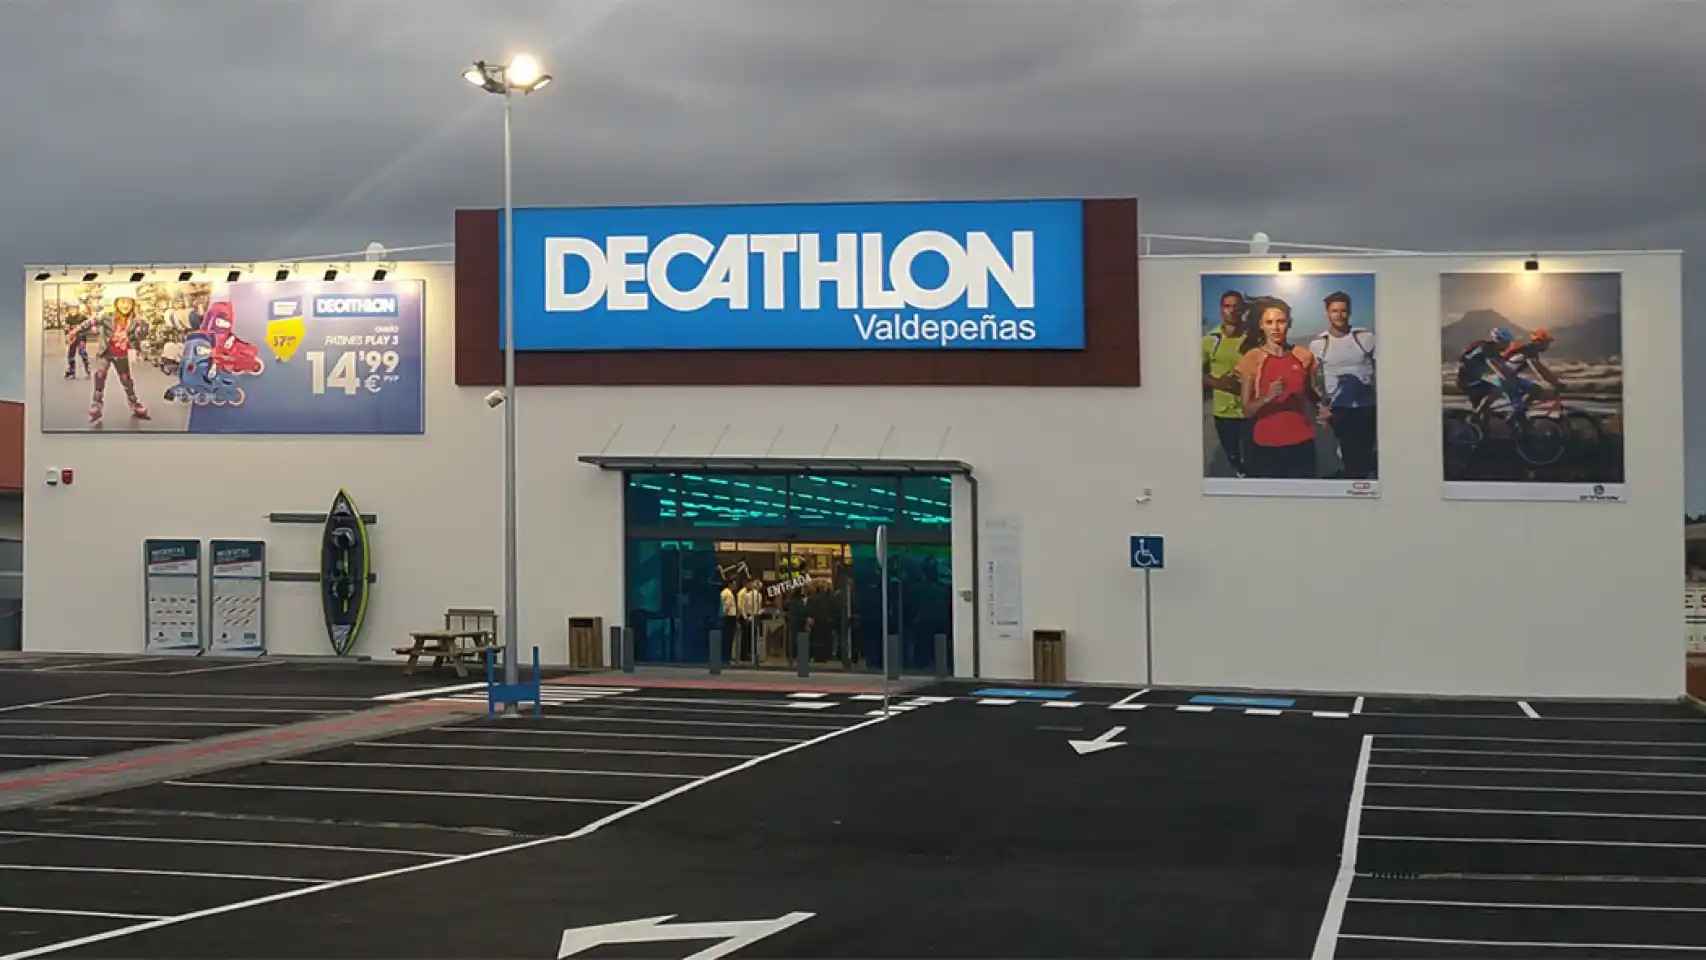 Some Decathlon car parks will offer electric car charging